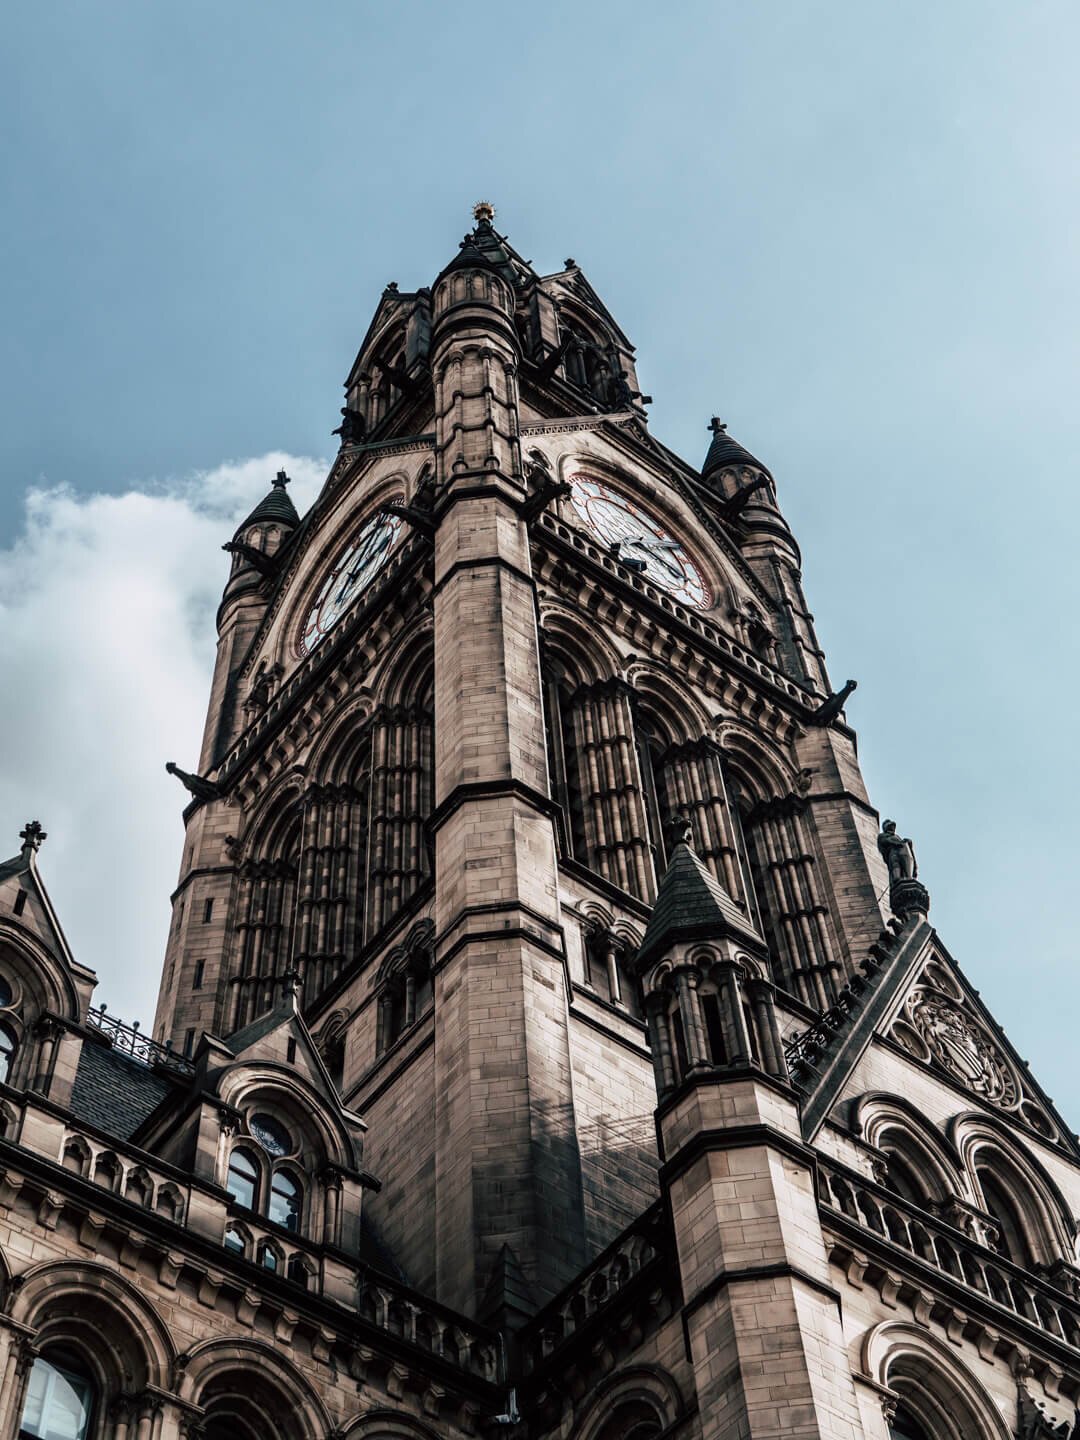 Manchester's town hall clock tower